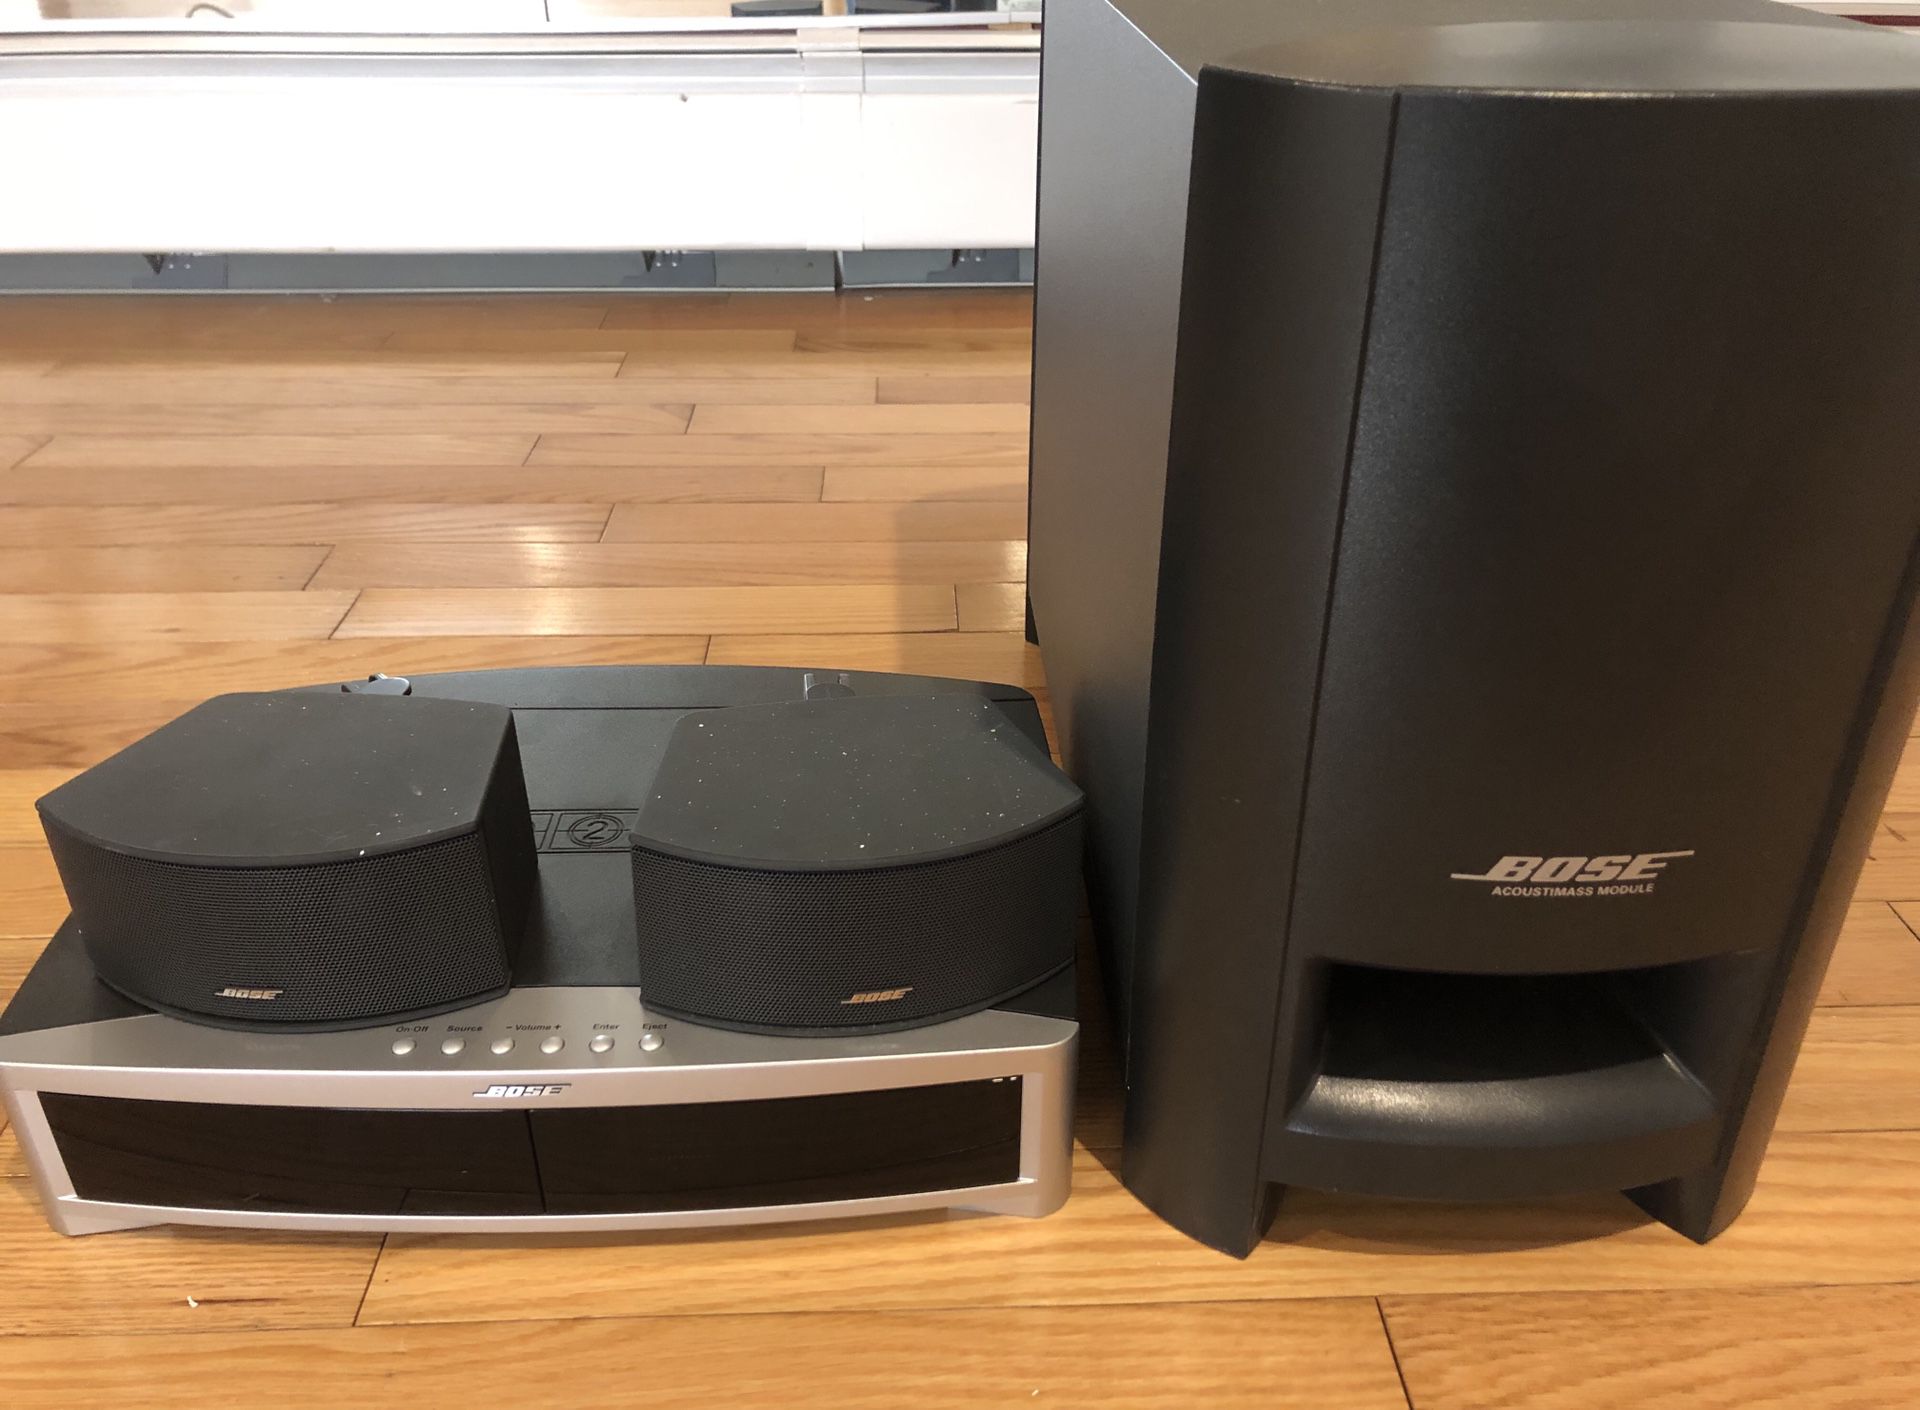 Bose accoustimass module PS3-2-1 ll Powered Speaker System